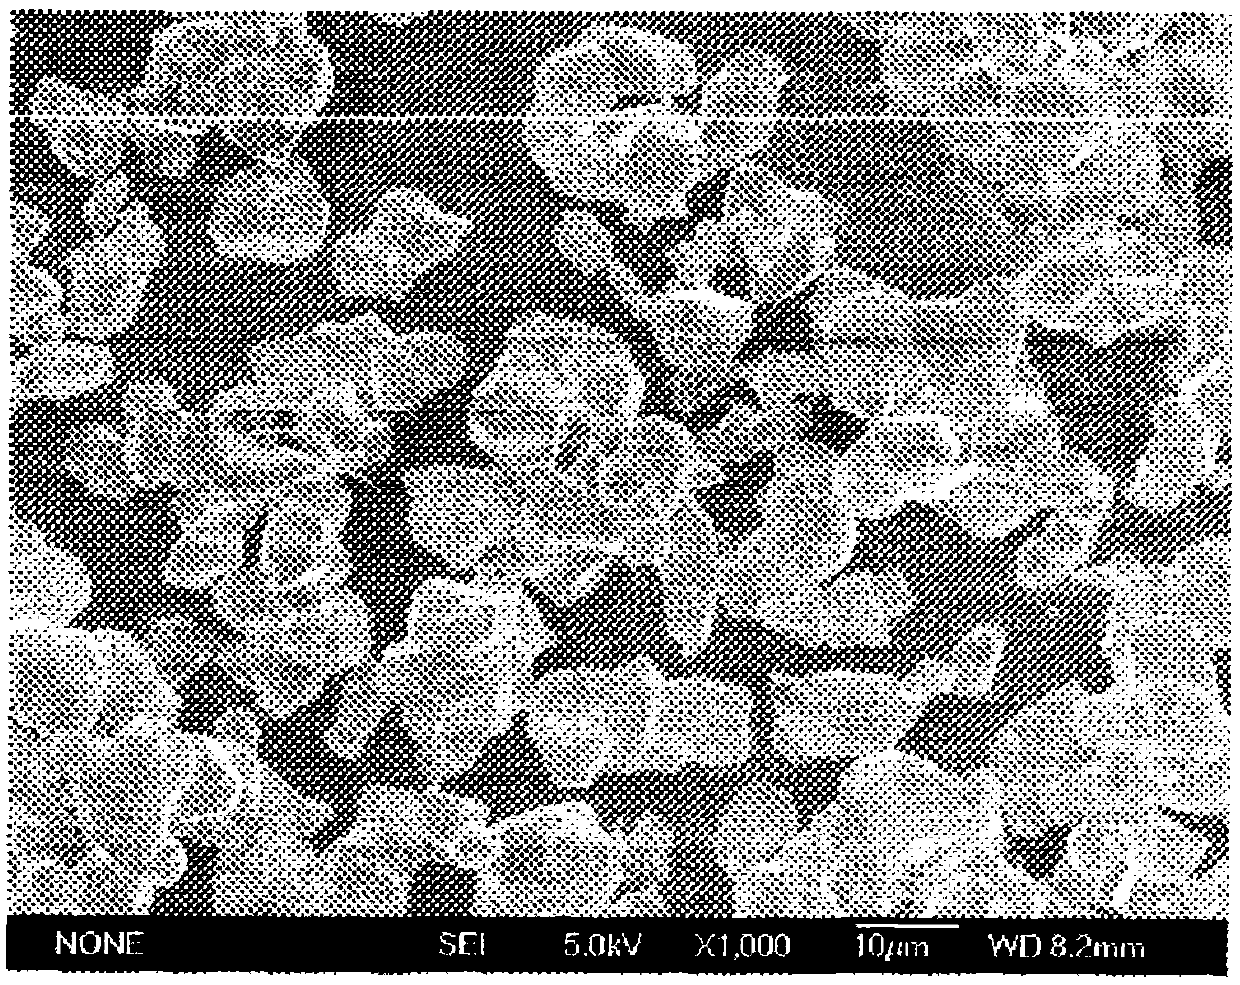 LiMn2-xMxO4.yLiAlO2 as anode material for lithium ion battery